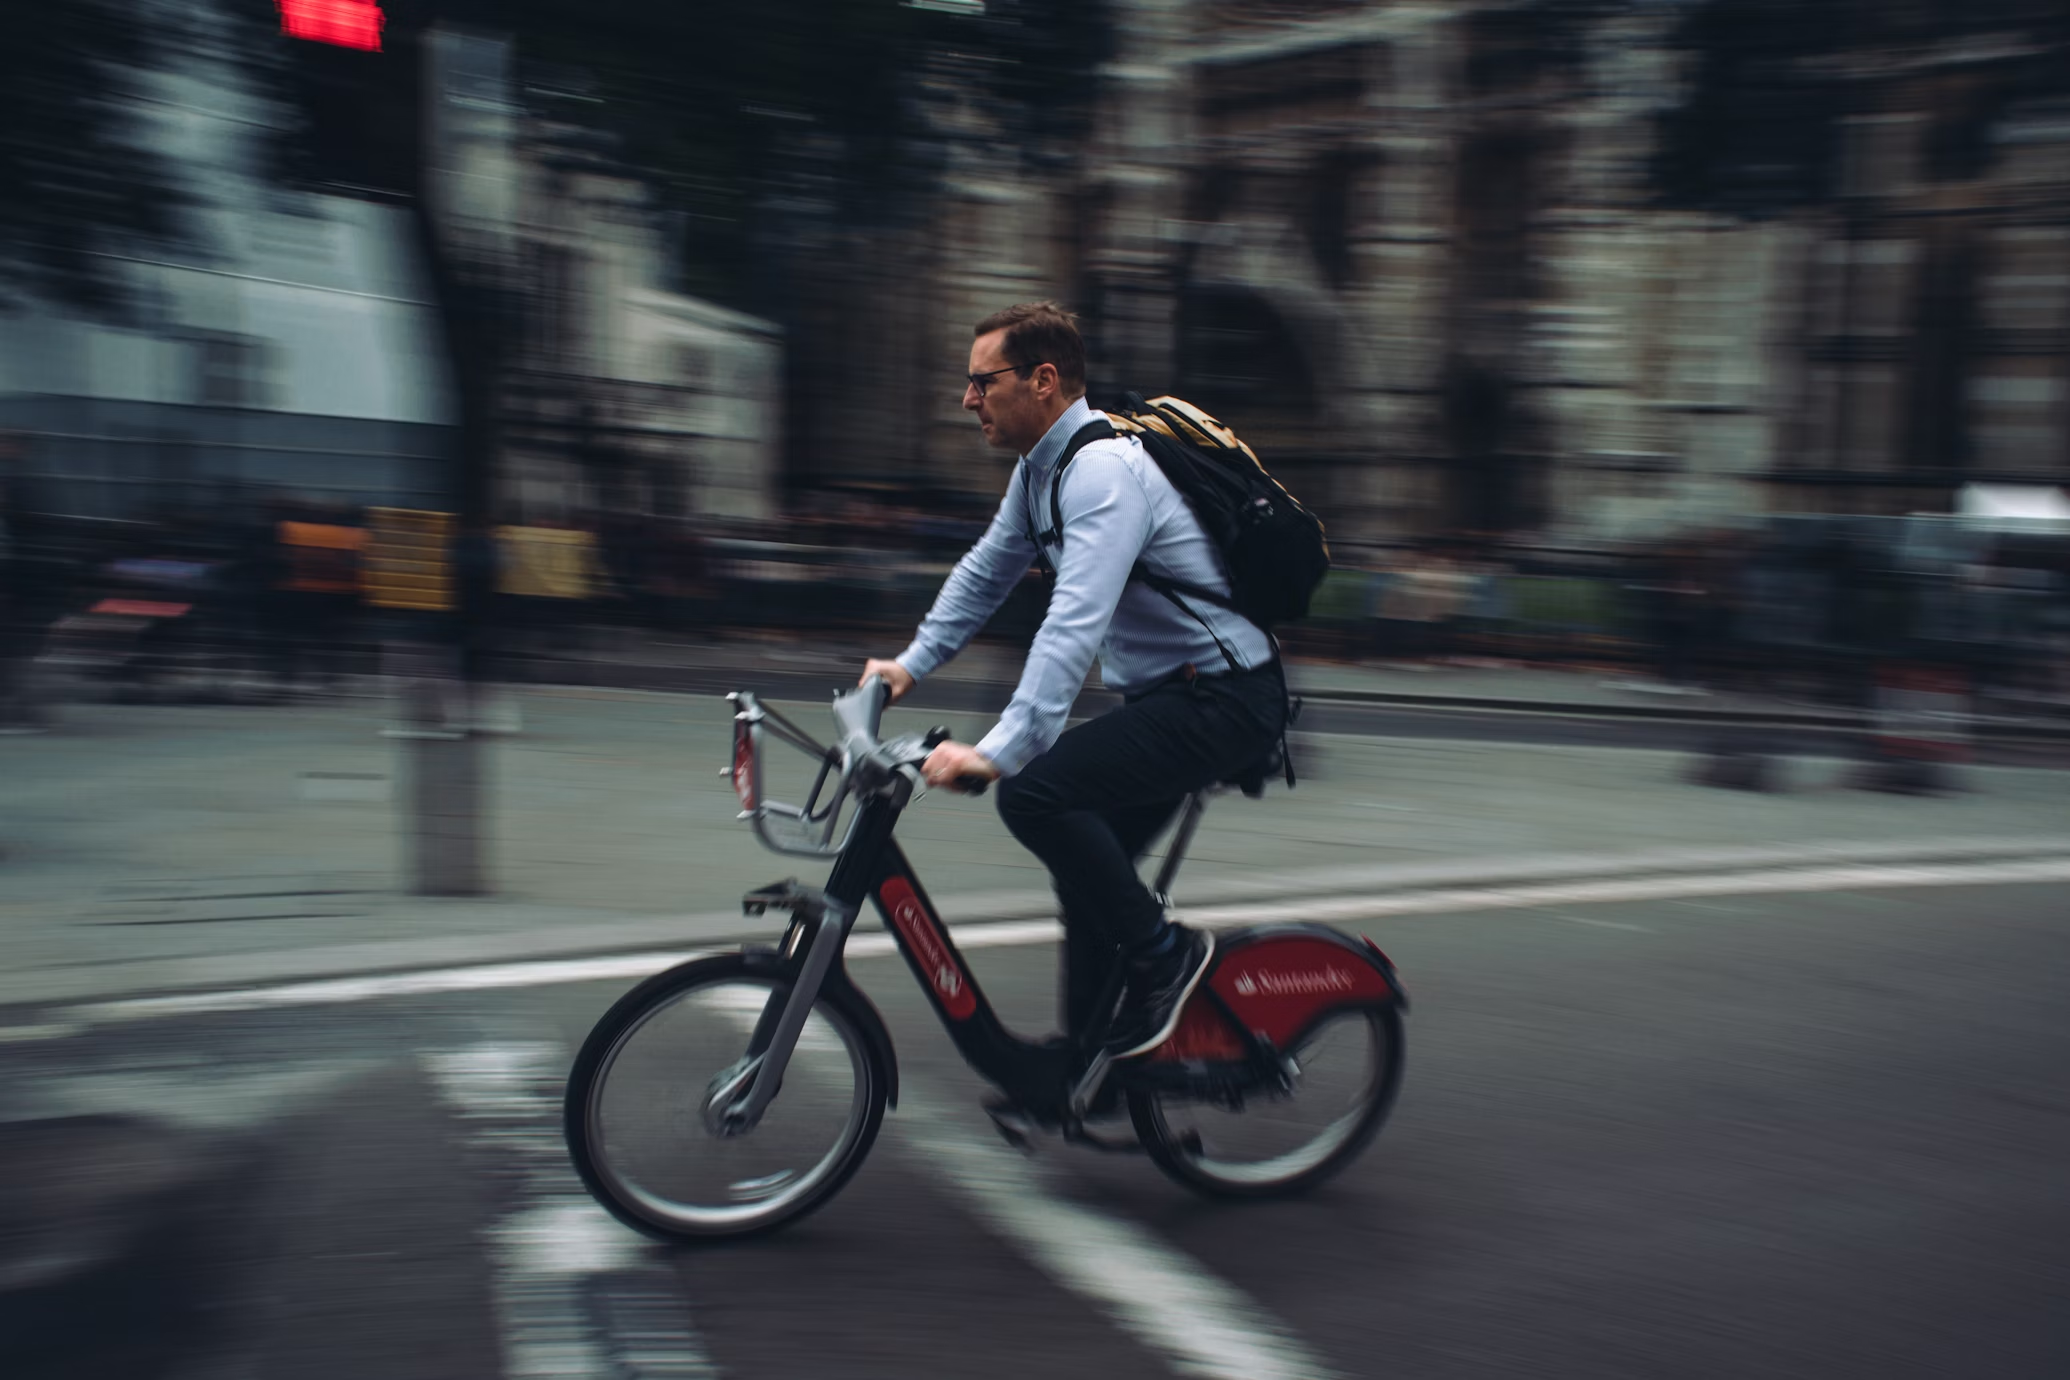 49% of UK citizens can’t afford to buy a bike outright, study finds